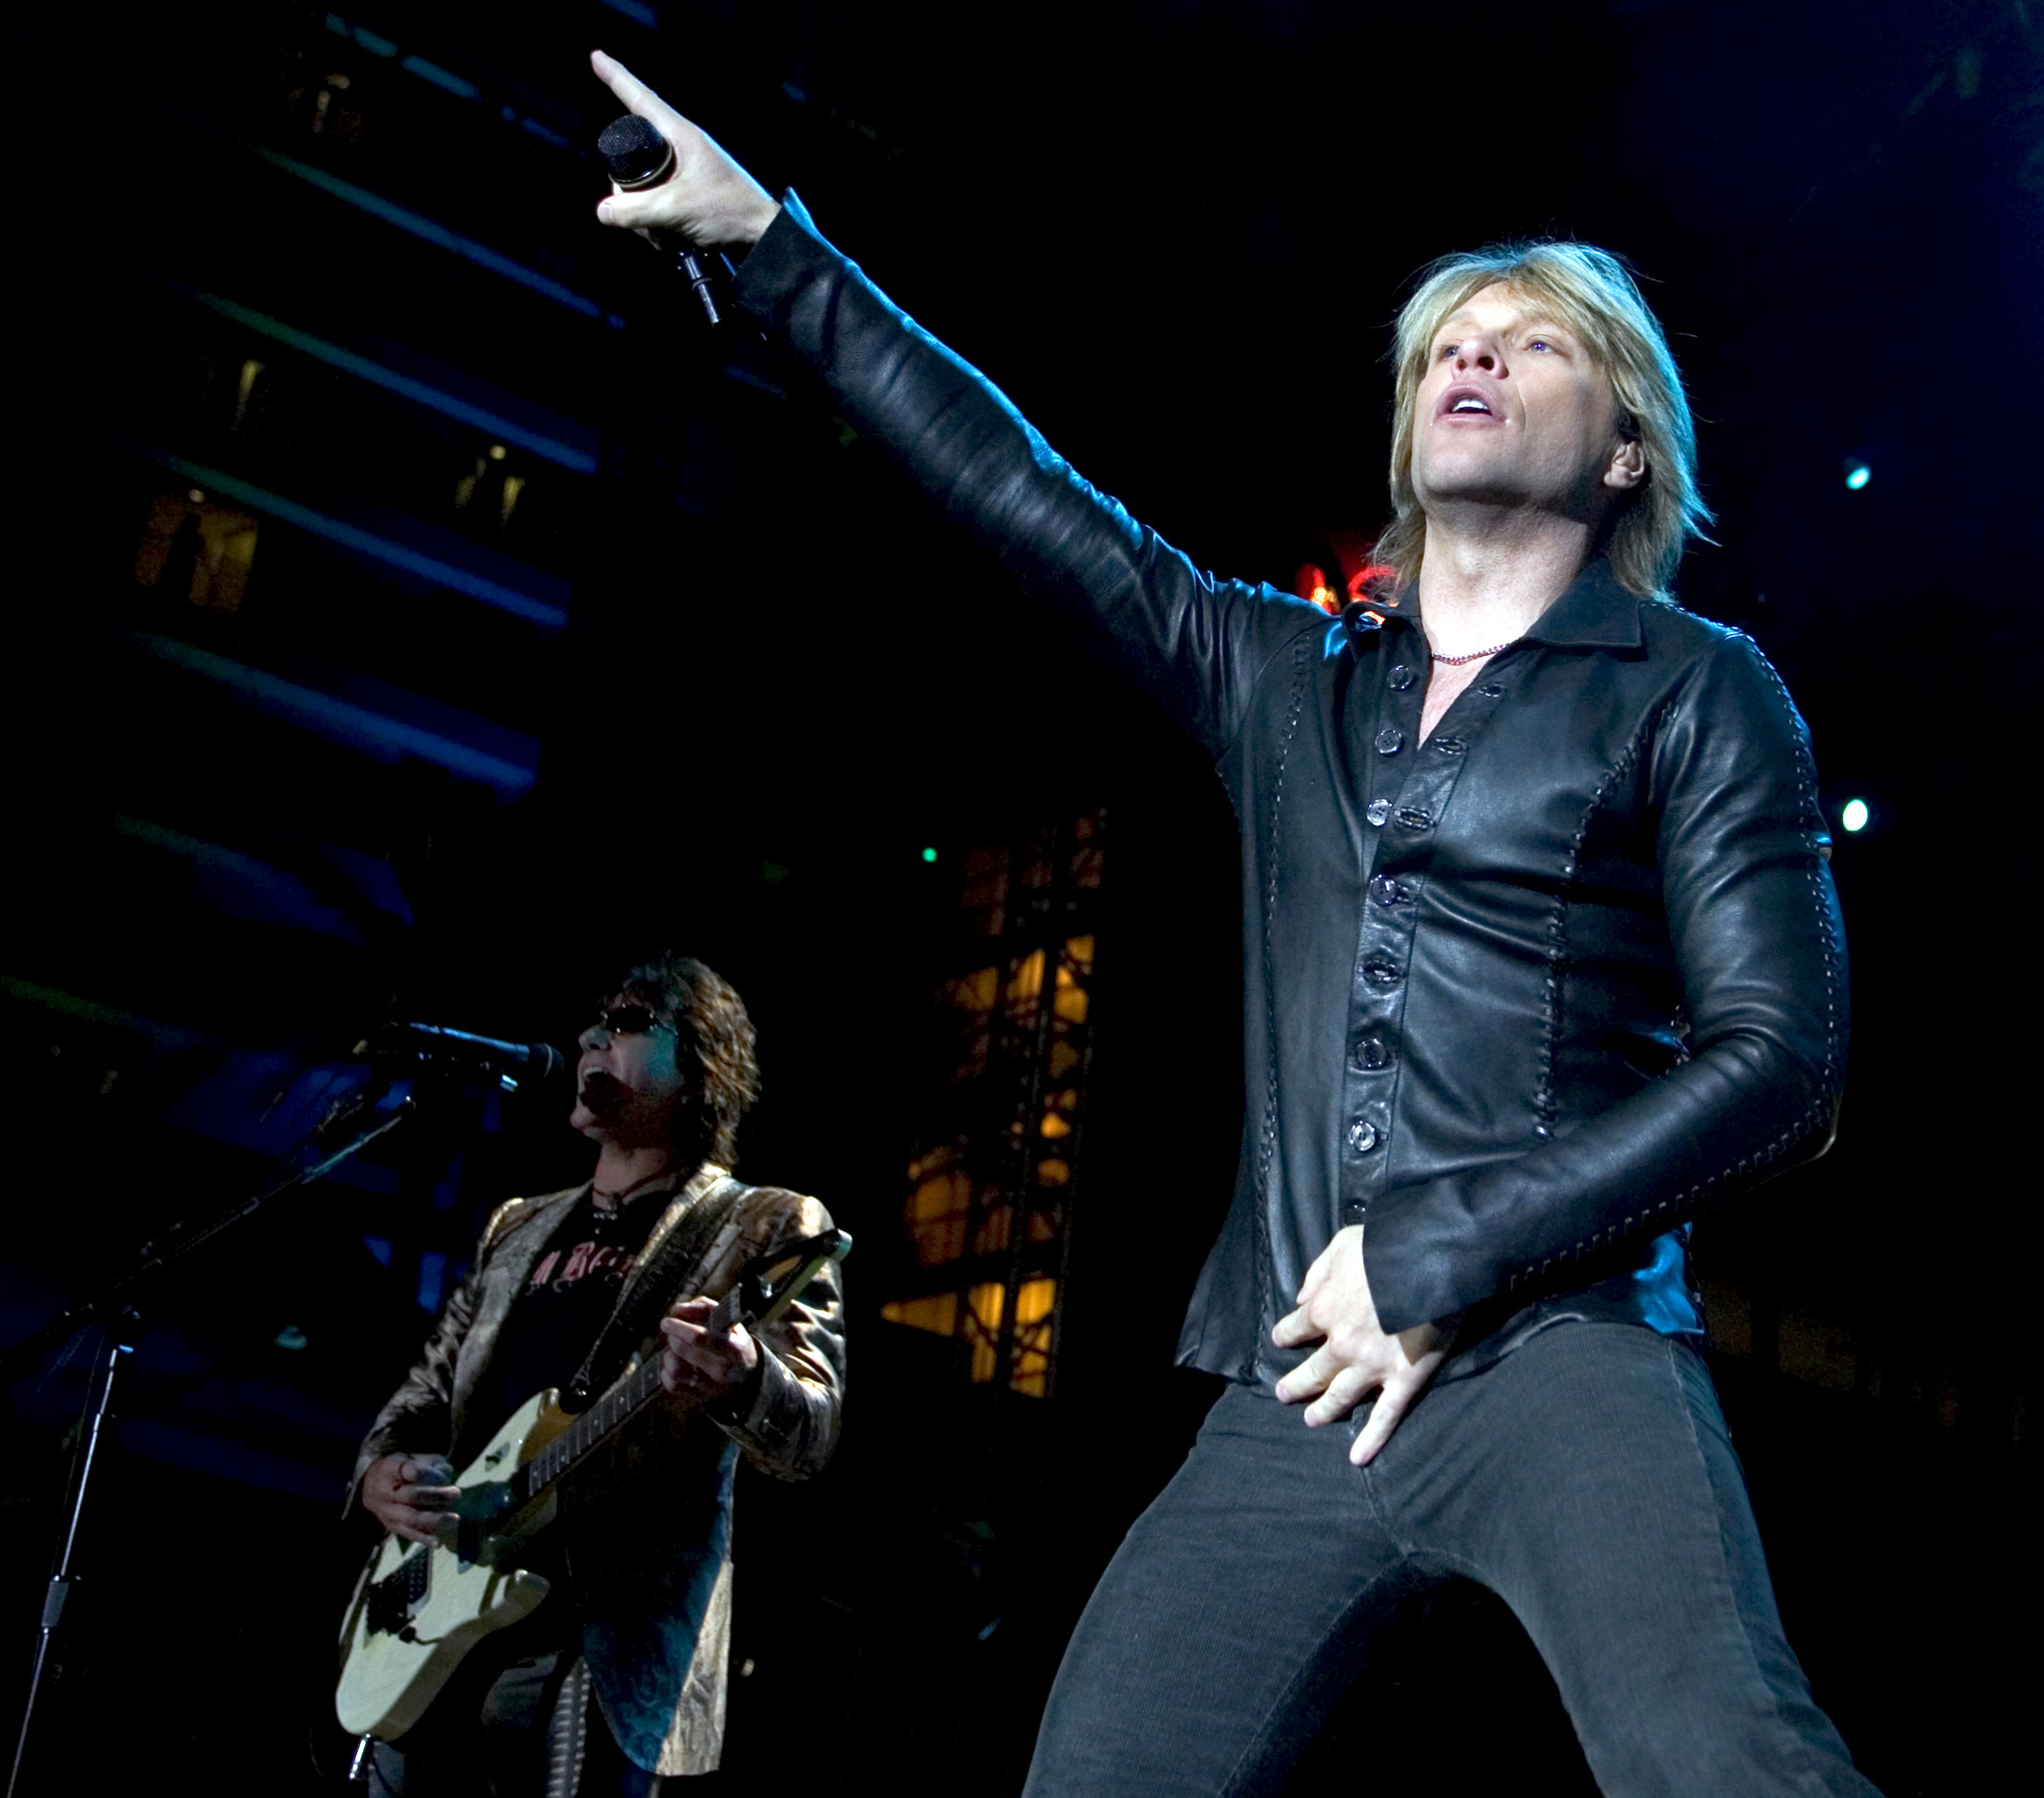 Singer Bon Jovi (R) and guitarist Richie Sambora of U.S. rock group Bon Jovi perform during a sold-out show at the Hard Rock in Las Vegas, Nevada April 30, 2005, as part of the Hotel & Casino's 10th-anniversary celebration. REUTERS/Ethan Miller EM